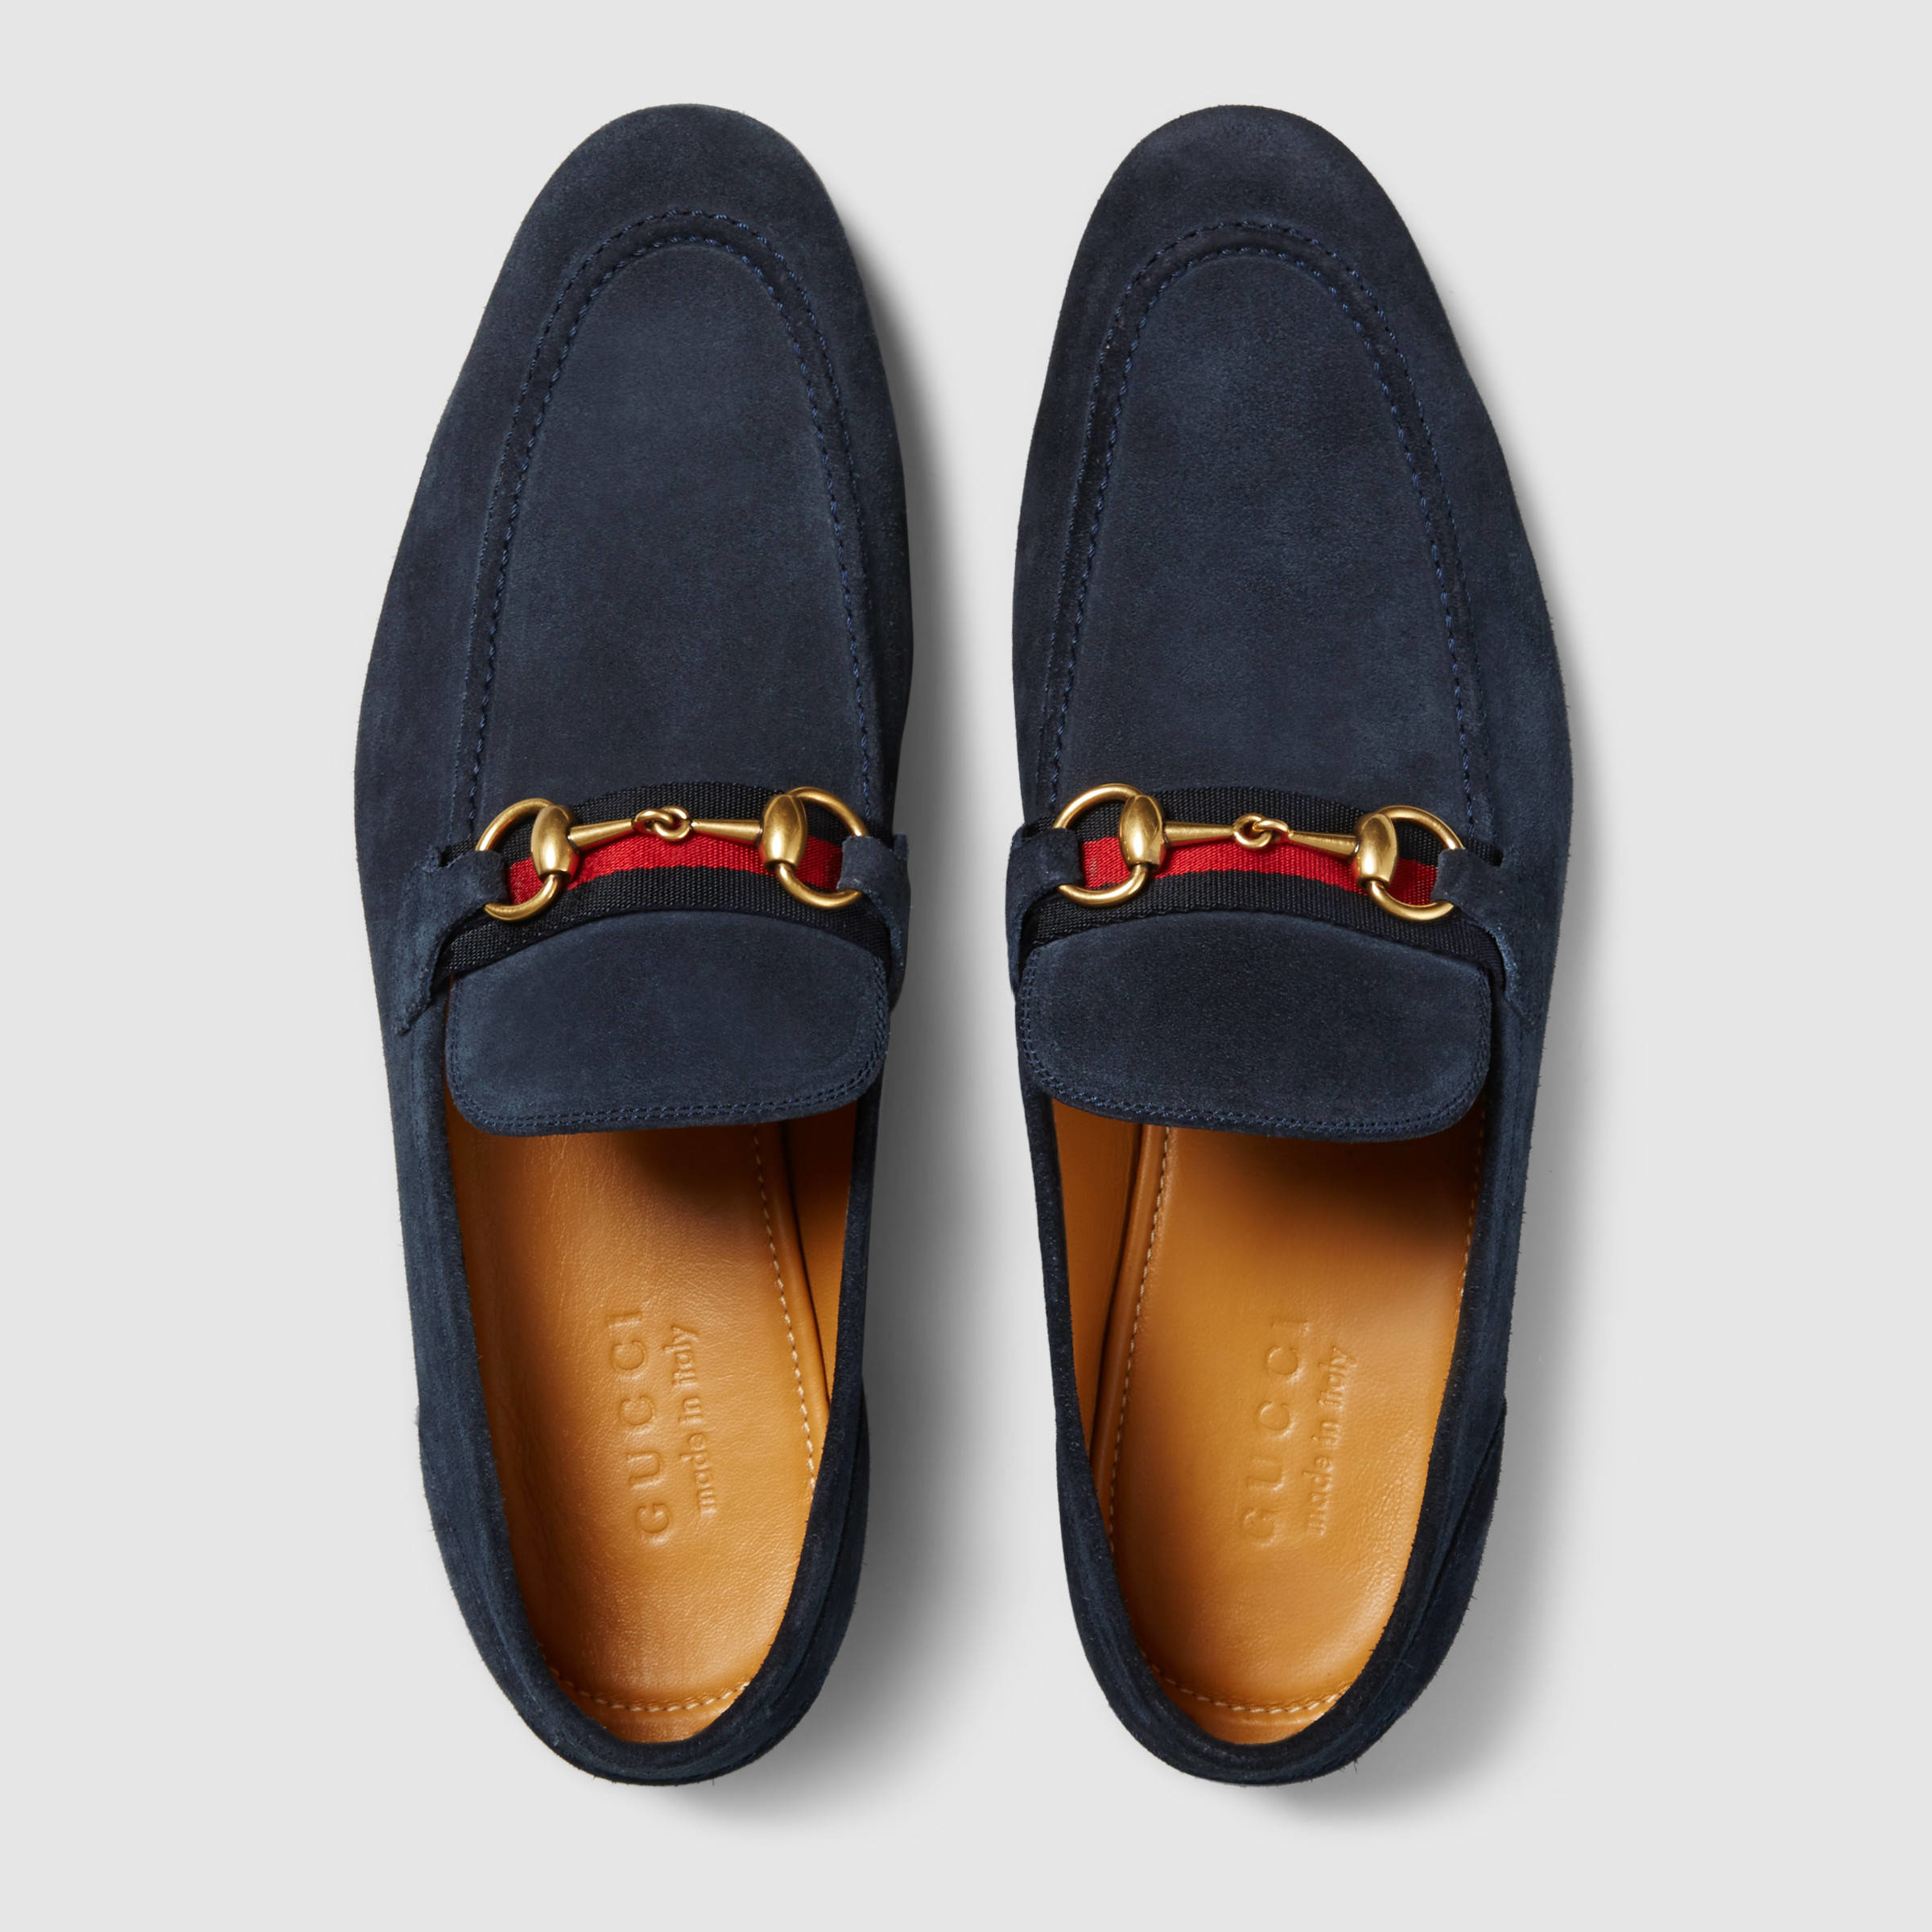 Lyst - Gucci Horsebit Suede Loafer With Web in Blue for Men